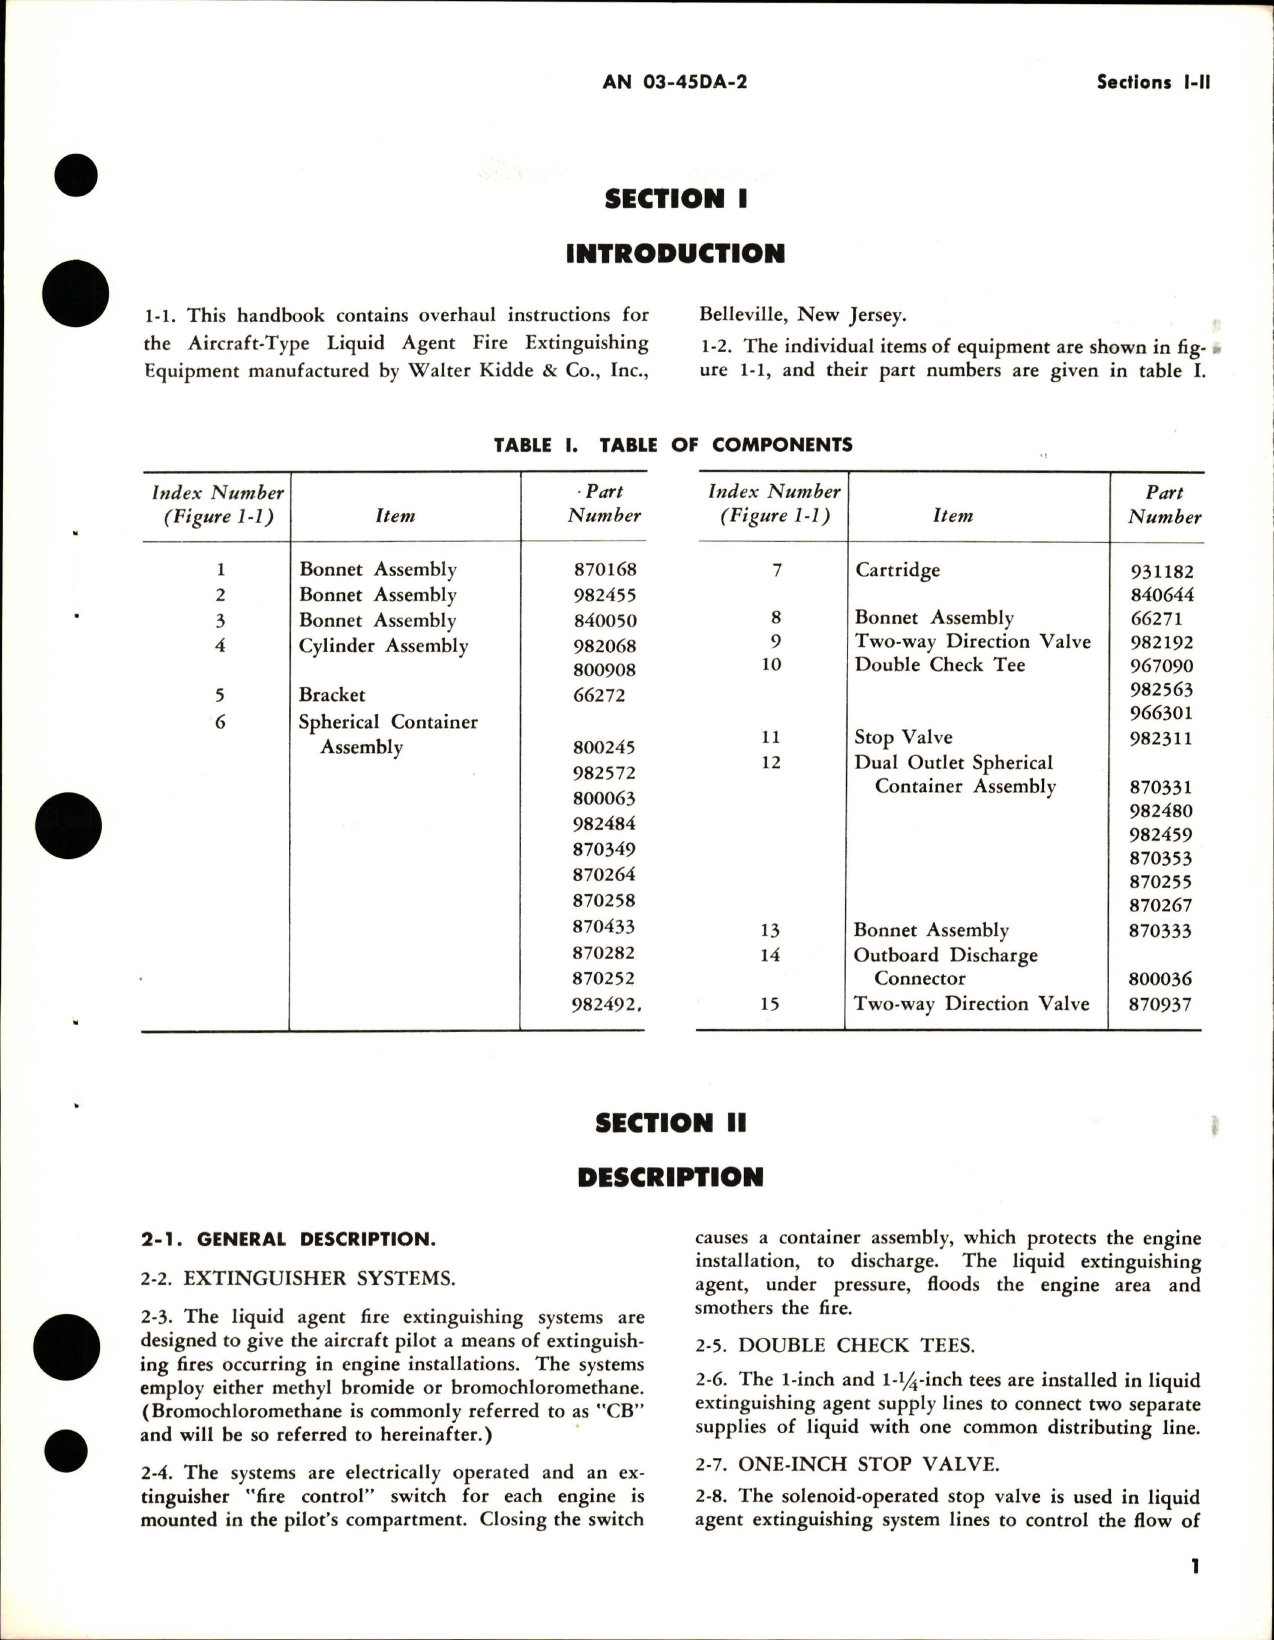 Sample page 5 from AirCorps Library document: Overhaul Instructions for Aircraft-Type Liquid Agent Fire Extinguishing Equipment 